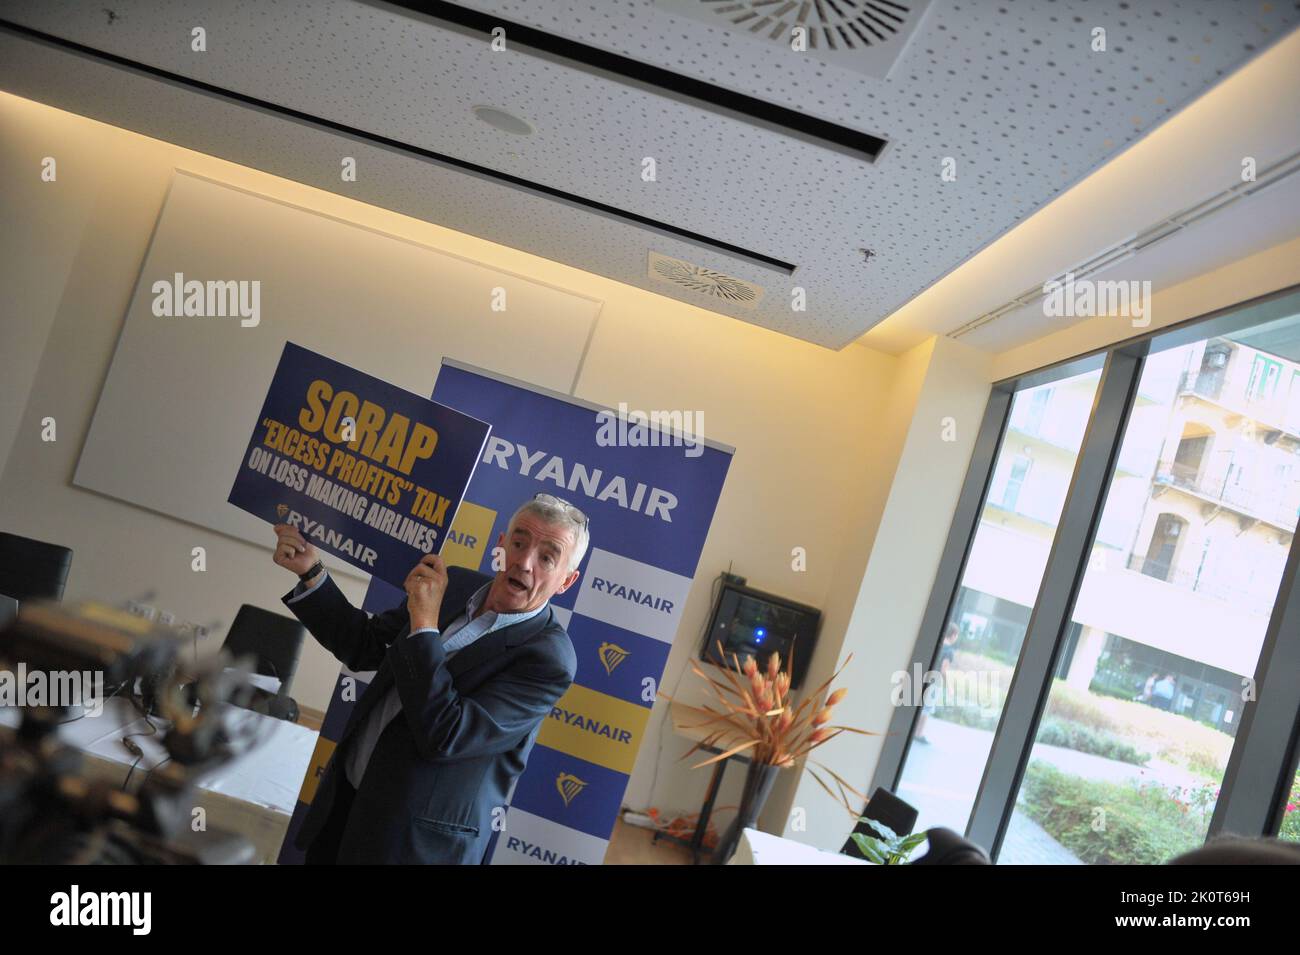 The CEO of Ryanair, Michael O’Leary holds a sign saying 'Scrap 'Excess Profits' Tax on loss making airlines', Budapest, Hungary, 13th Sep 2022, Balint Szentgallay / Alamy Live News Stock Photo